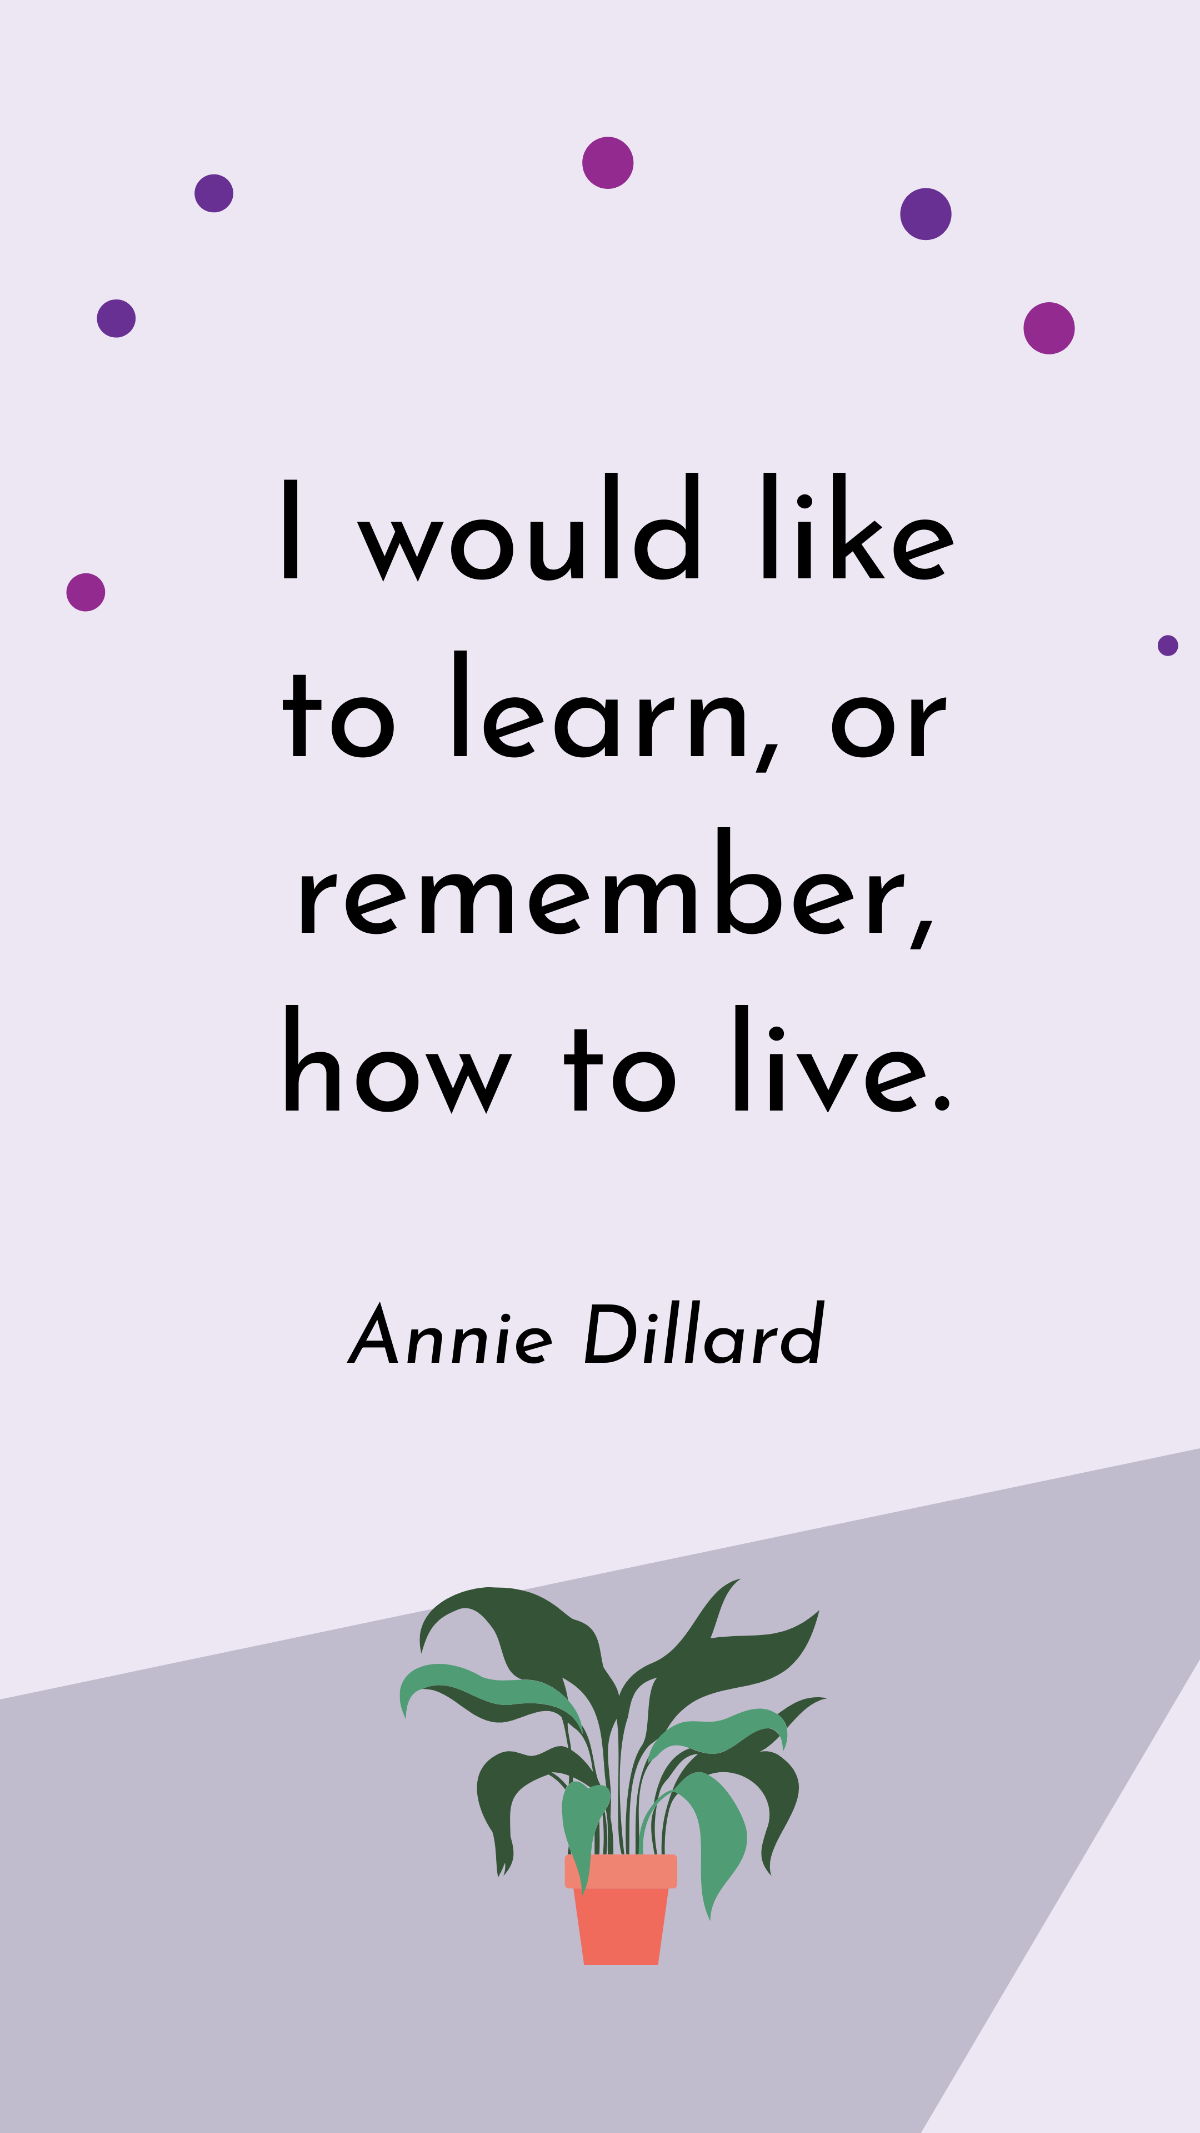 Free Annie Dillard - I would like to learn, or remember, how to live. Template